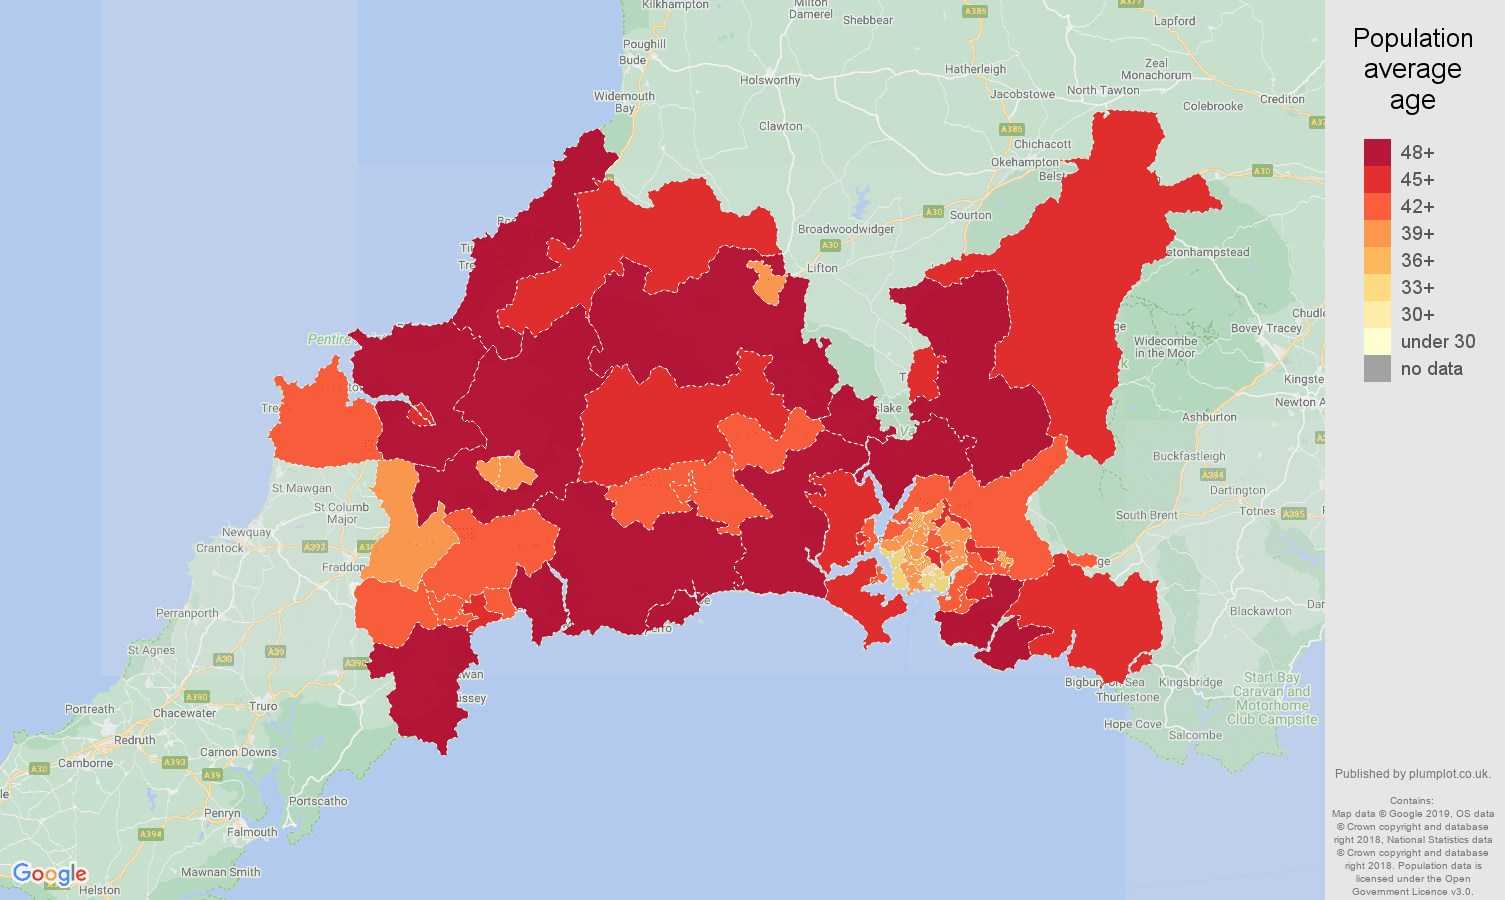 Plymouth population average age map